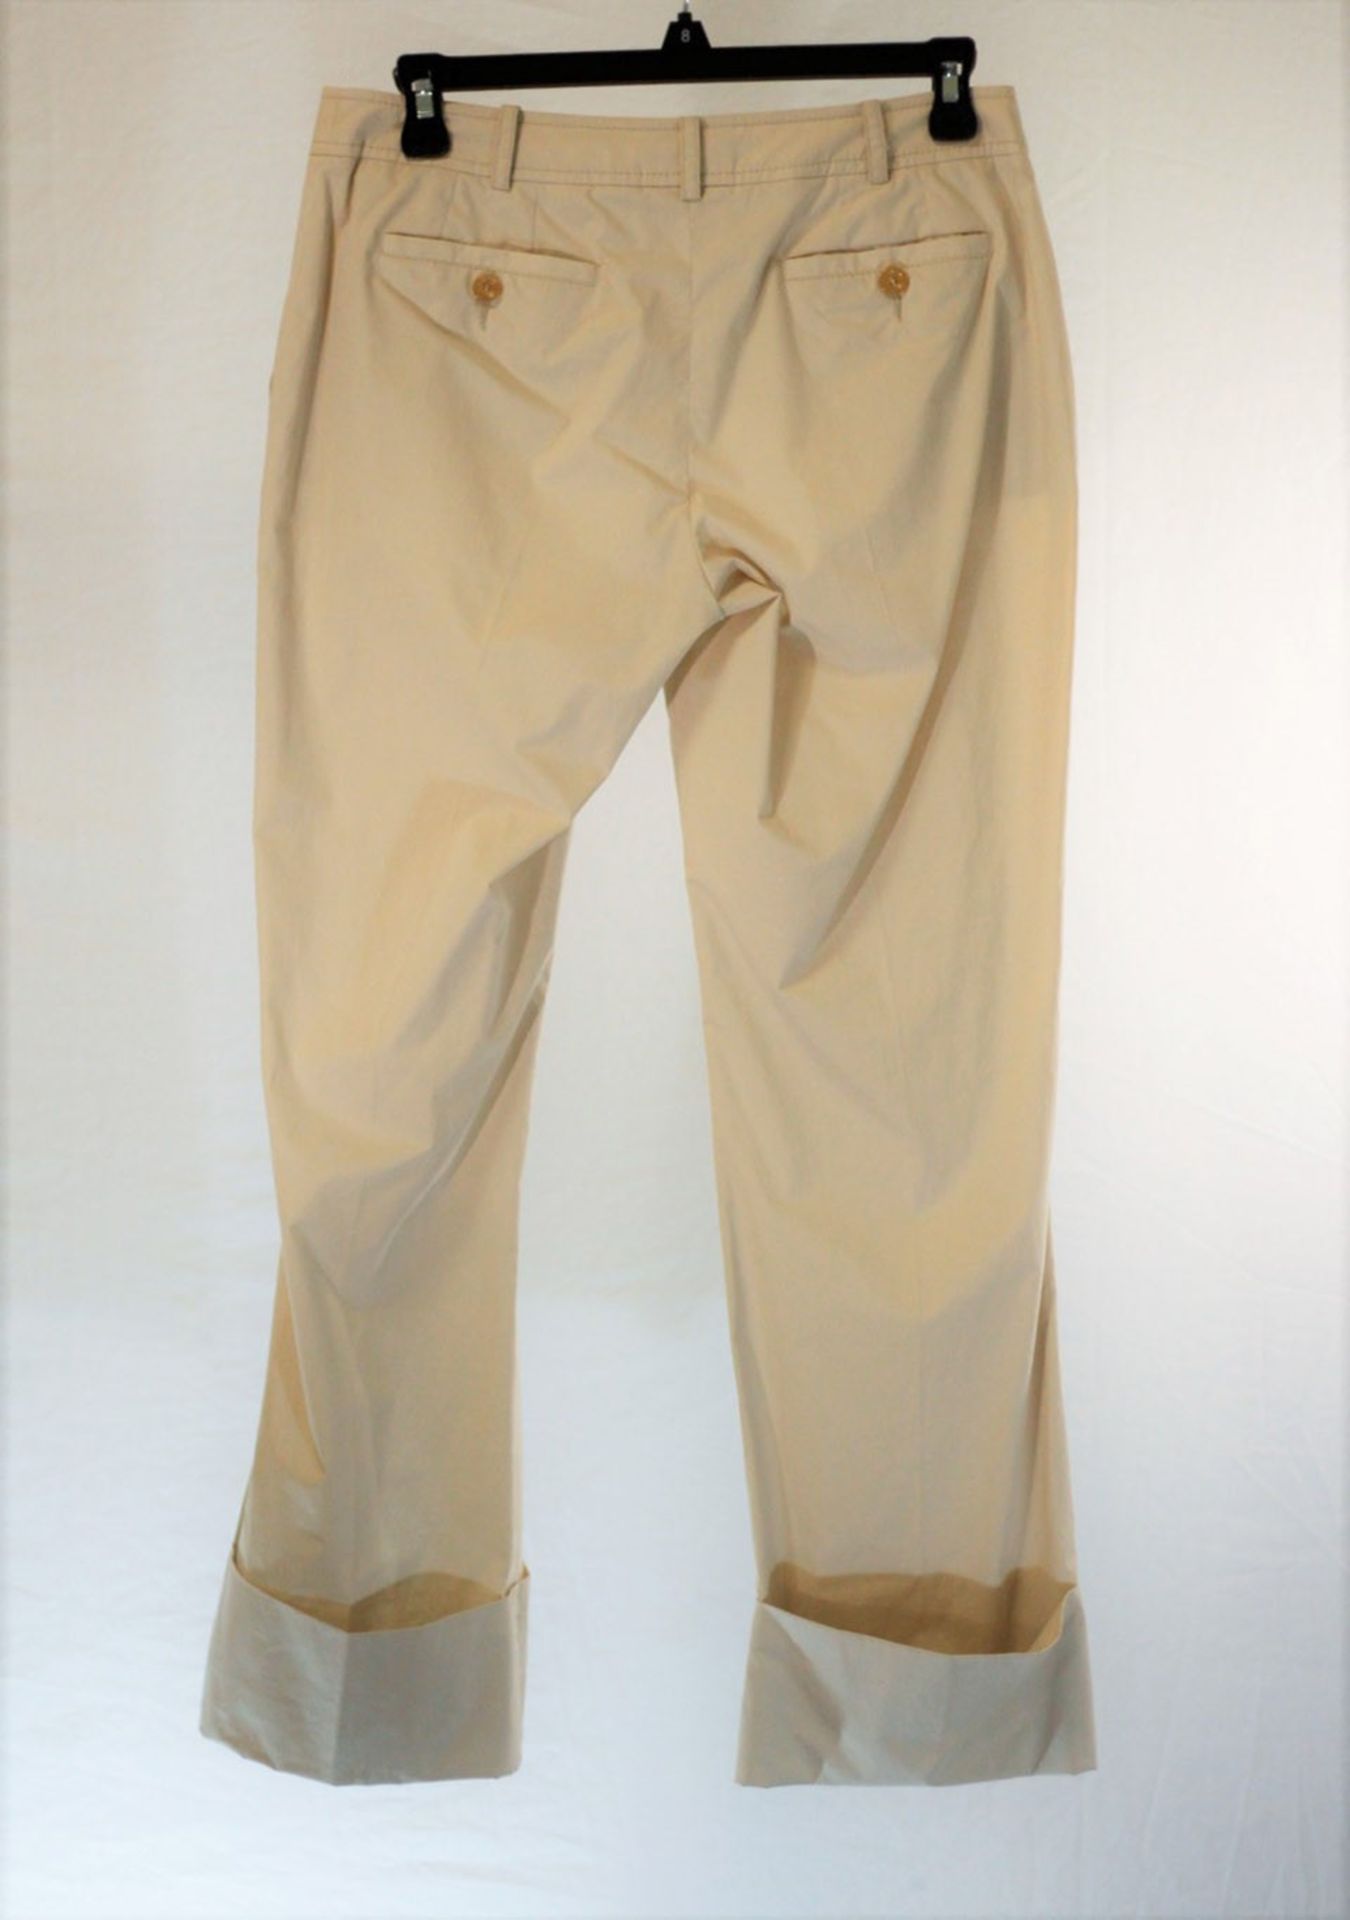 1 x Agnona Beige Trousers - Size: 14 - Material: 97% Cotton, 3% Elastane. Lining 100% Cupro - From a - Image 7 of 8